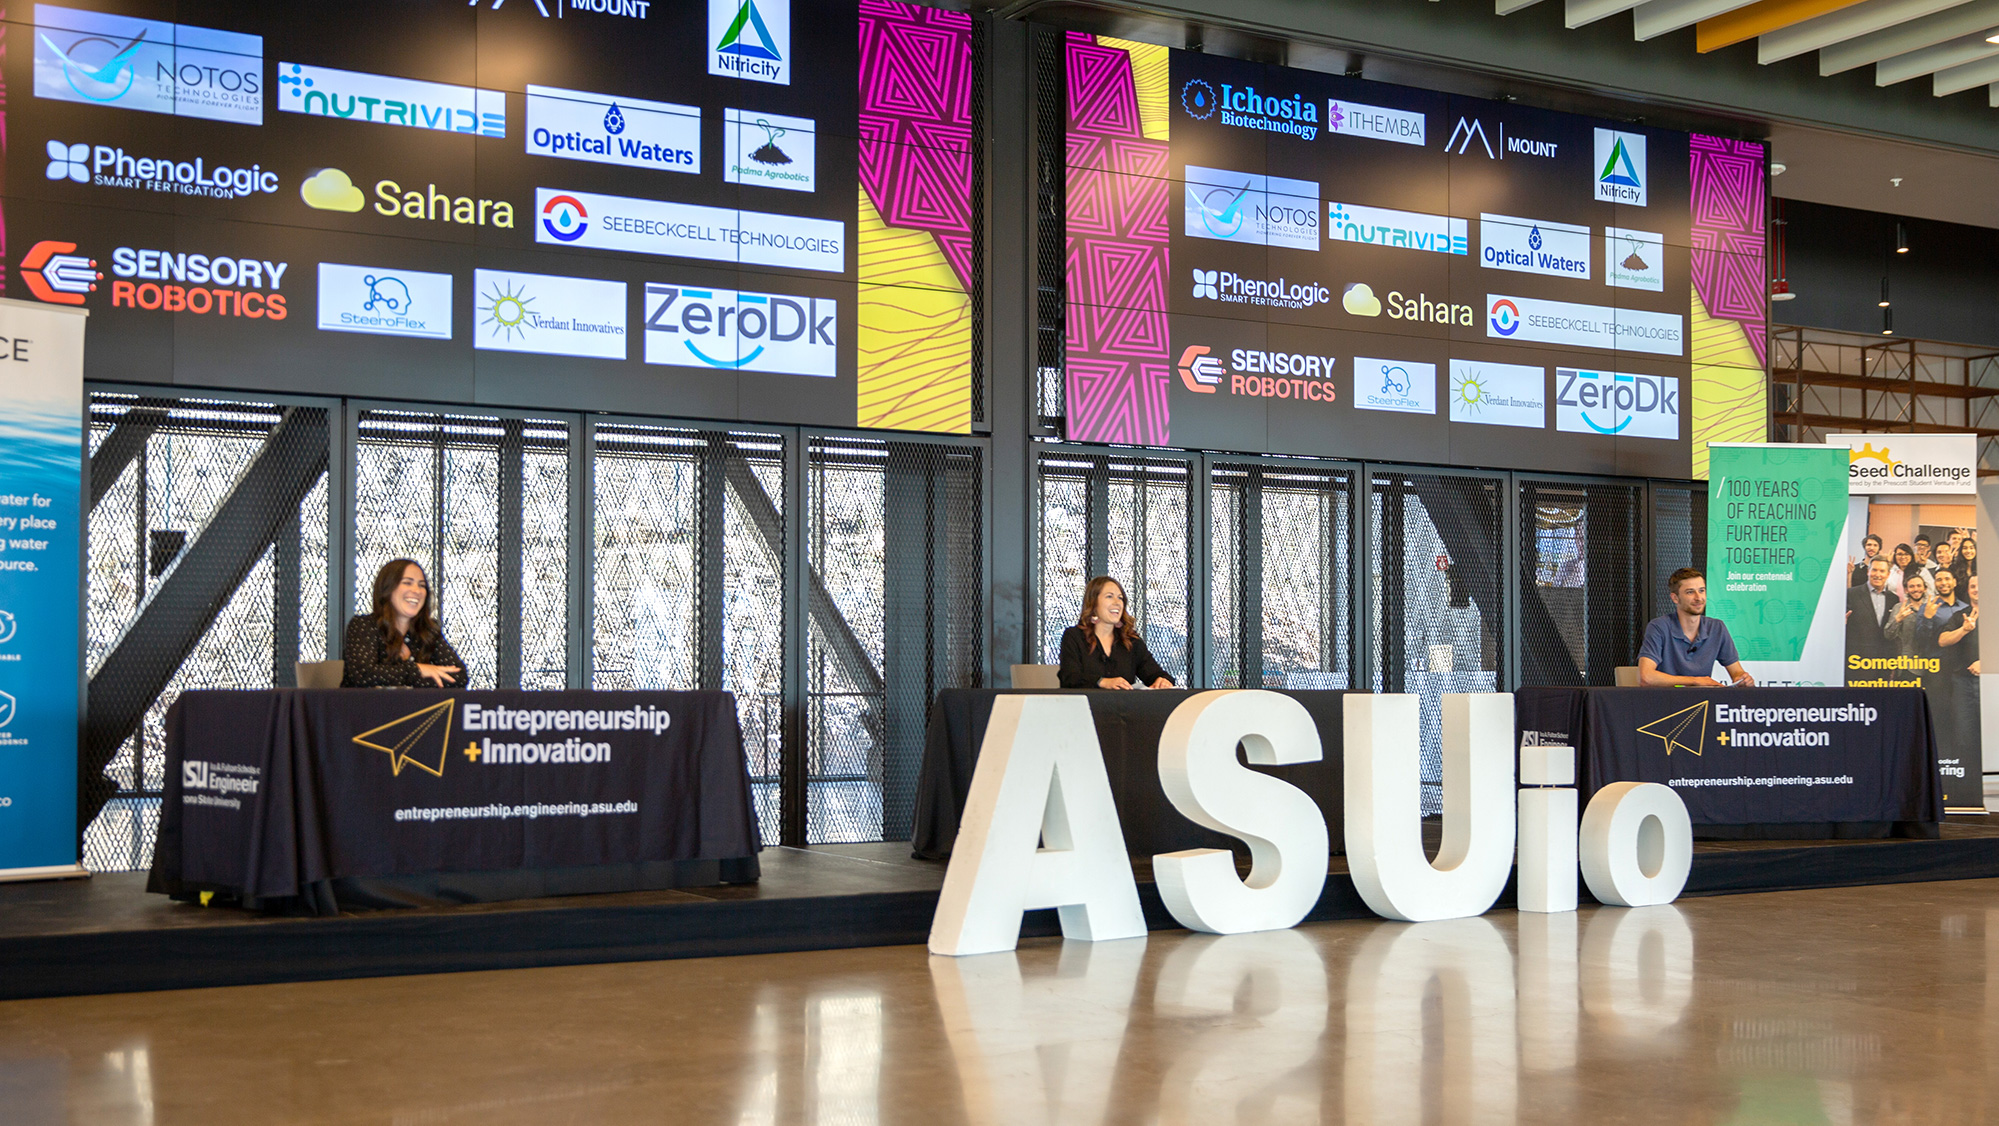 Image of the ASU.io stage during the 2021 competition.